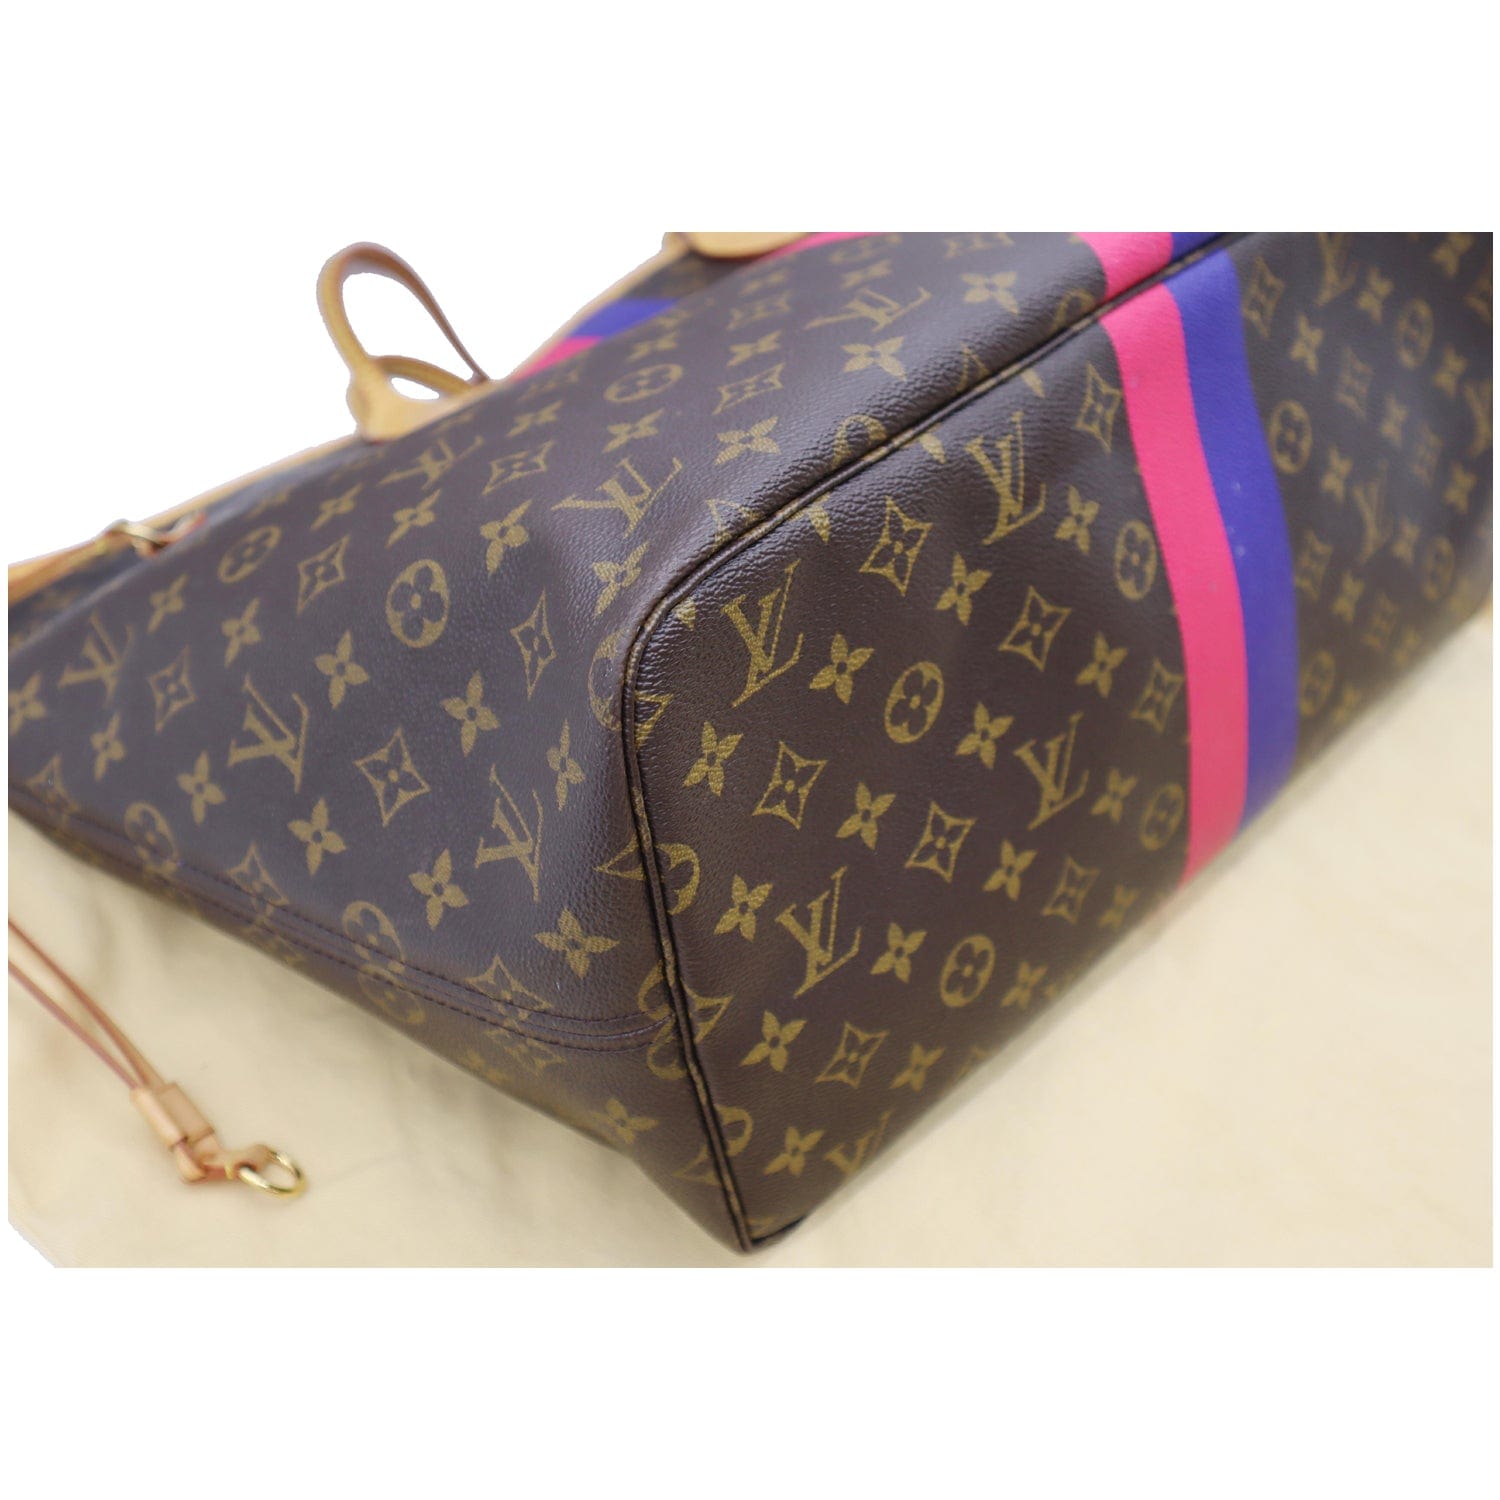 Louis Vuitton Neverfull My LV Heritage Monogram Canvas Tote Bag Brown